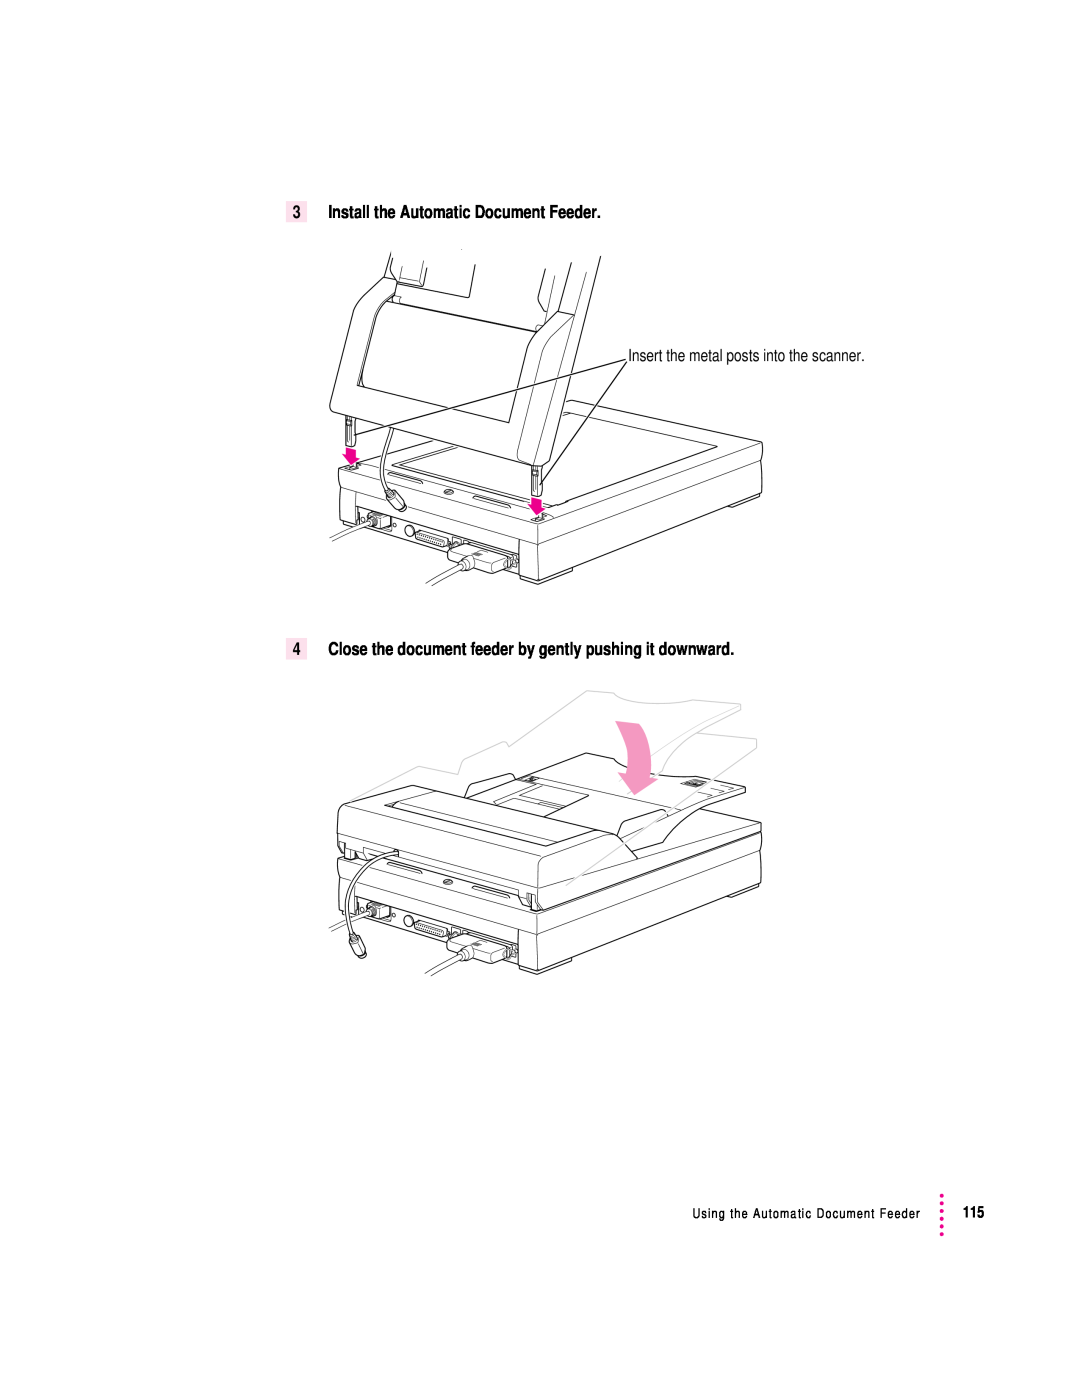 Apple 1230, 627 user manual Install the Automatic Document Feeder, Insert the metal posts into the scanner 